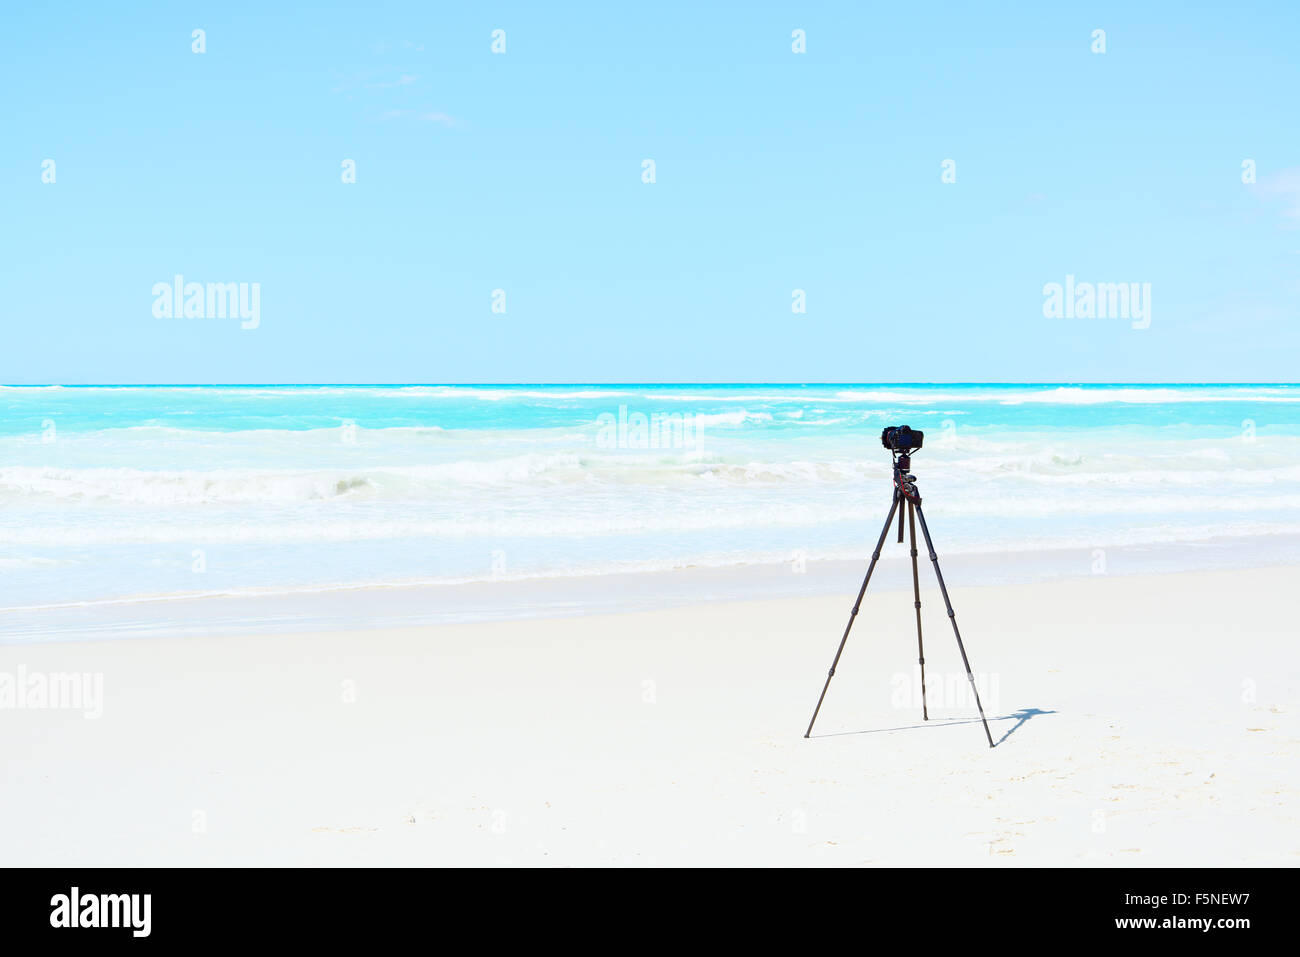 Digital Camera, tripod and filters on white beach ready for landscape photography Stock Photo